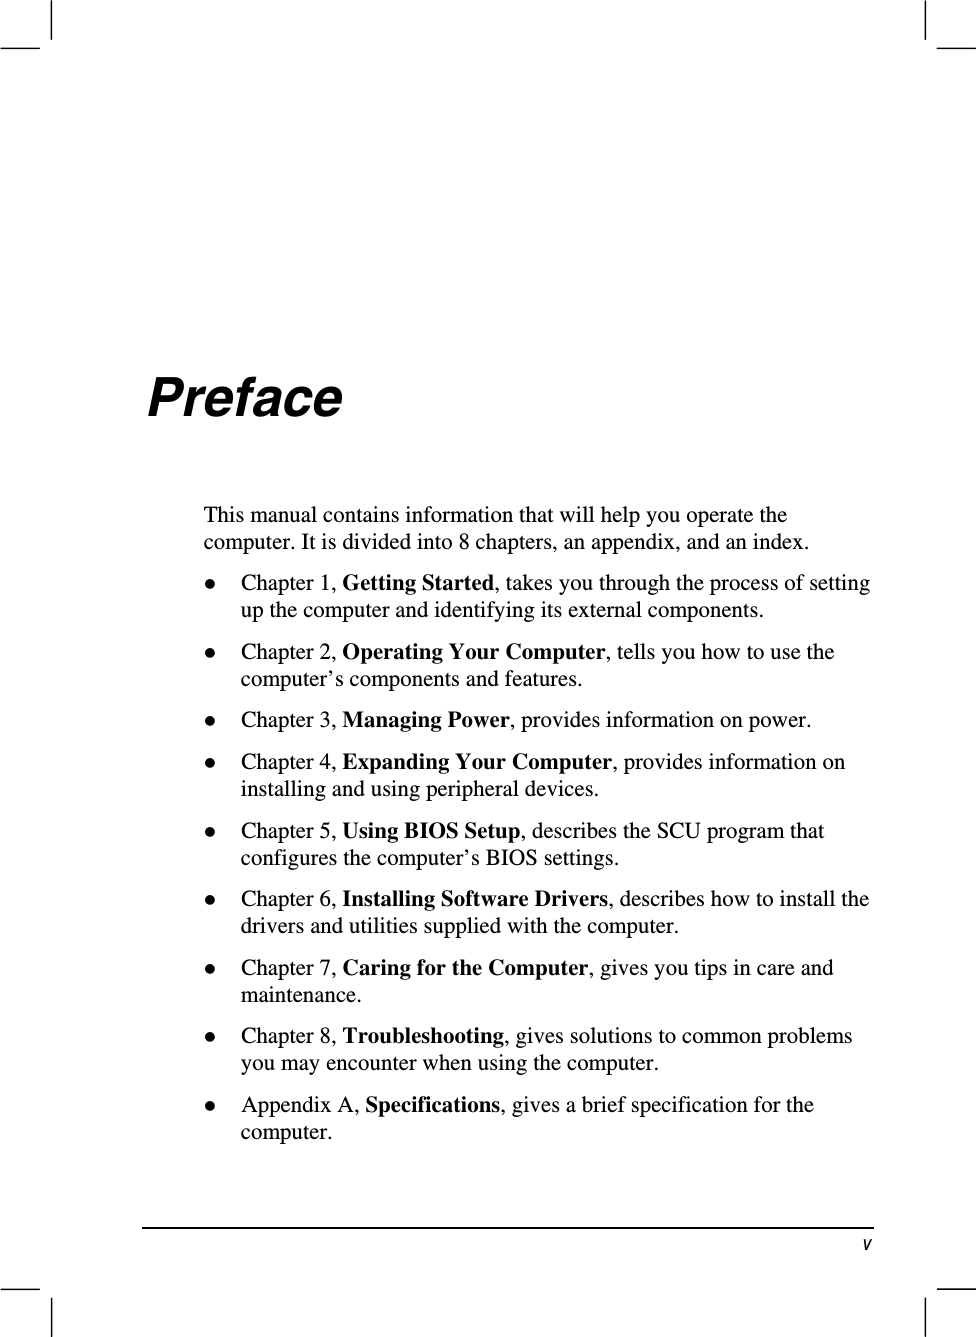 YPrefaceThis manual contains information that will help you operate thecomputer. It is divided into 8 chapters, an appendix, and an index.z Chapter 1, Getting Started, takes you through the process of settingup the computer and identifying its external components.z Chapter 2, Operating Your Computer, tells you how to use thecomputer’s components and features.z Chapter 3, Managing Power, provides information on power.z Chapter 4, Expanding Your Computer, provides information oninstalling and using peripheral devices.z Chapter 5, Using BIOS Setup, describes the SCU program thatconfigures the computer’s BIOS settings.z Chapter 6, Installing Software Drivers, describes how to install thedrivers and utilities supplied with the computer.z Chapter 7, Caring for the Computer, gives you tips in care andmaintenance.z Chapter 8, Troubleshooting, gives solutions to common problemsyou may encounter when using the computer.z Appendix A, Specifications, gives a brief specification for thecomputer.